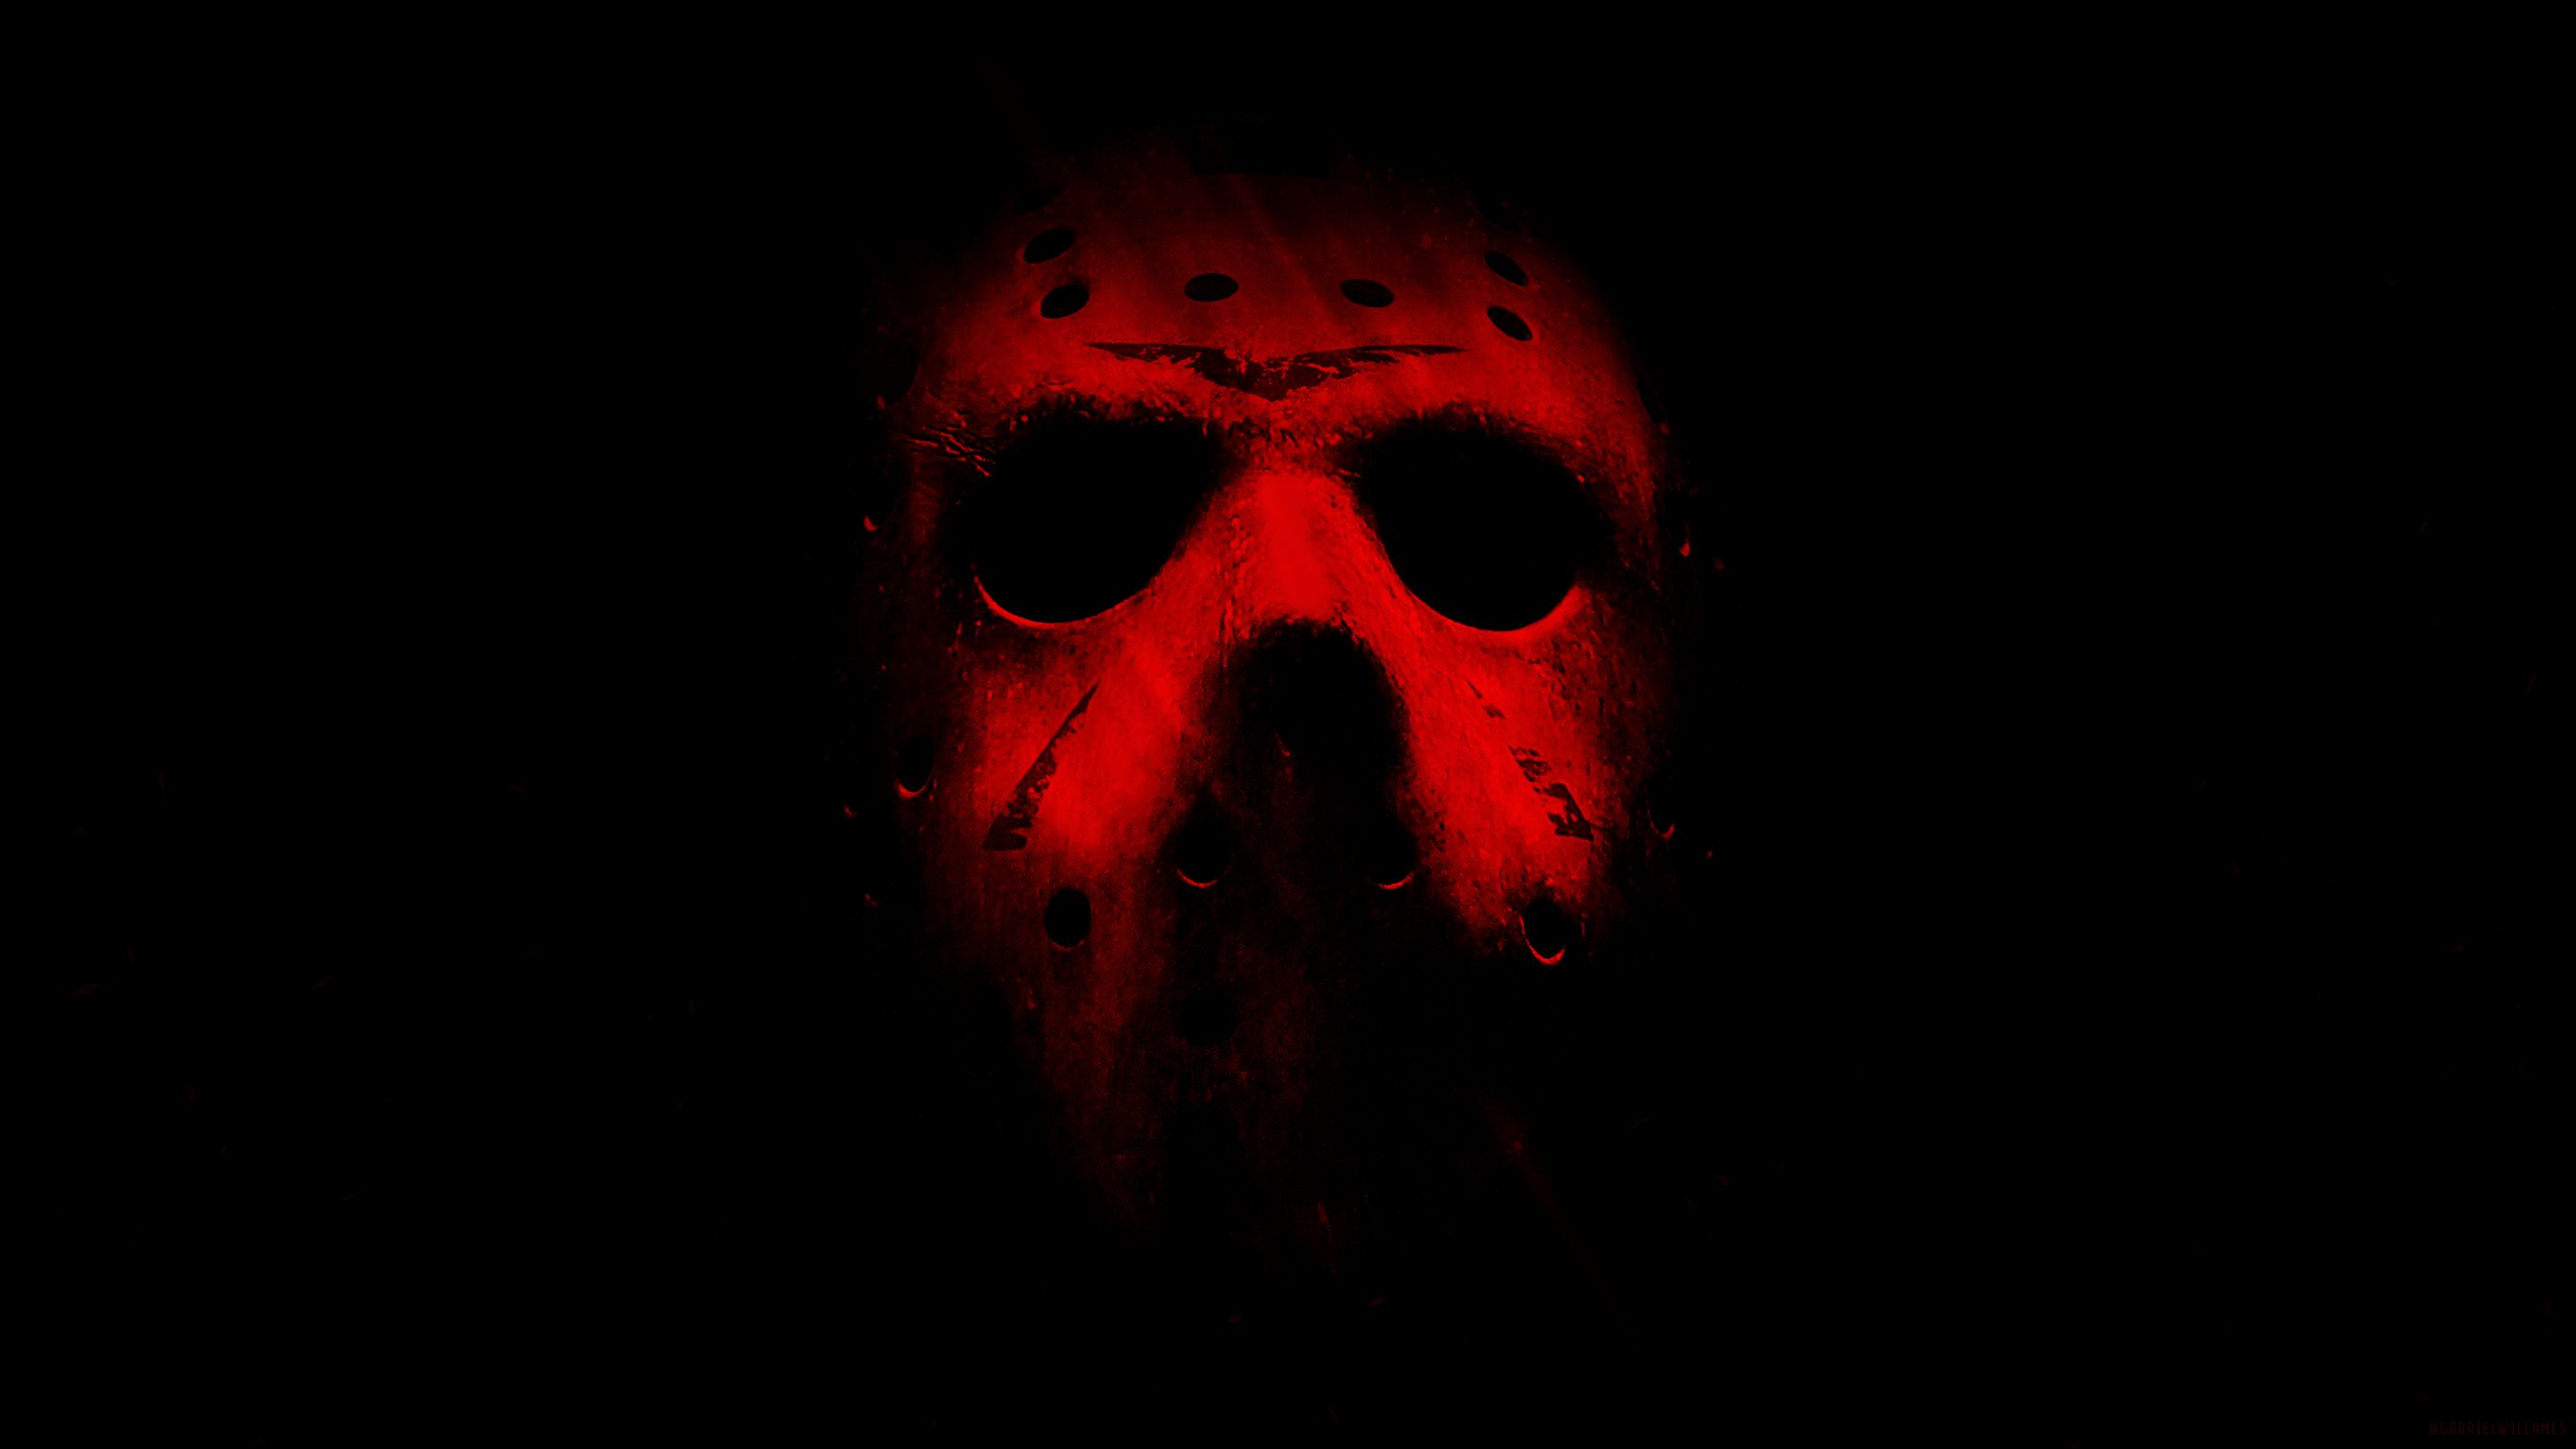 jason voorhees, friday the 13th, movie, friday the 13th (2009) cell phone wallpapers